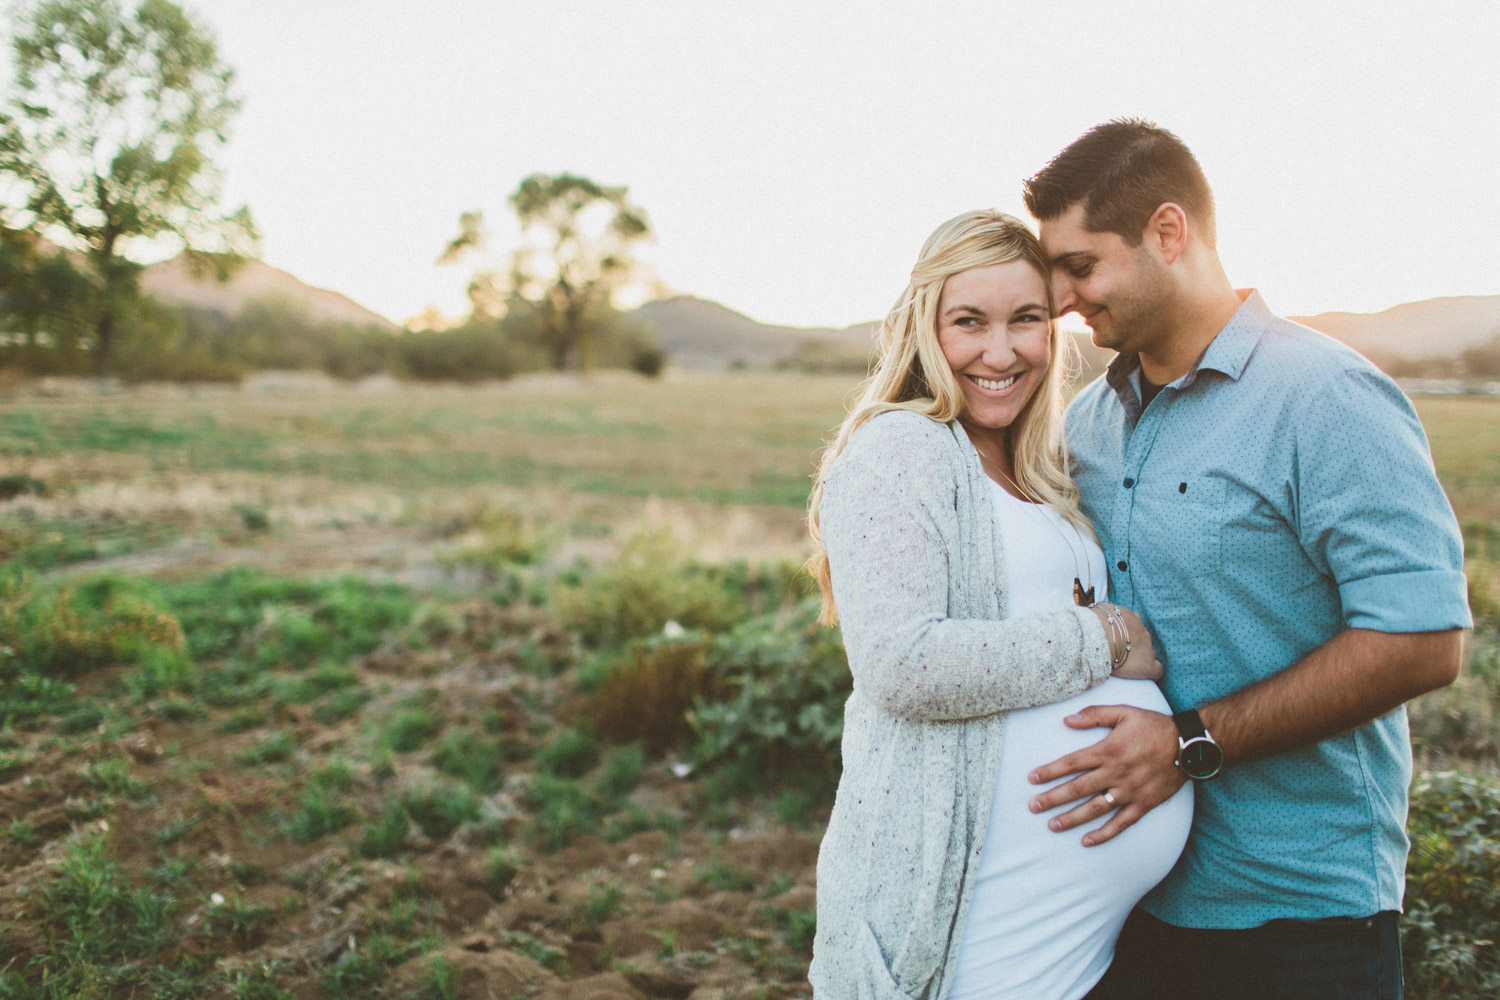 Pregnant wife with husband taking maternity photos.